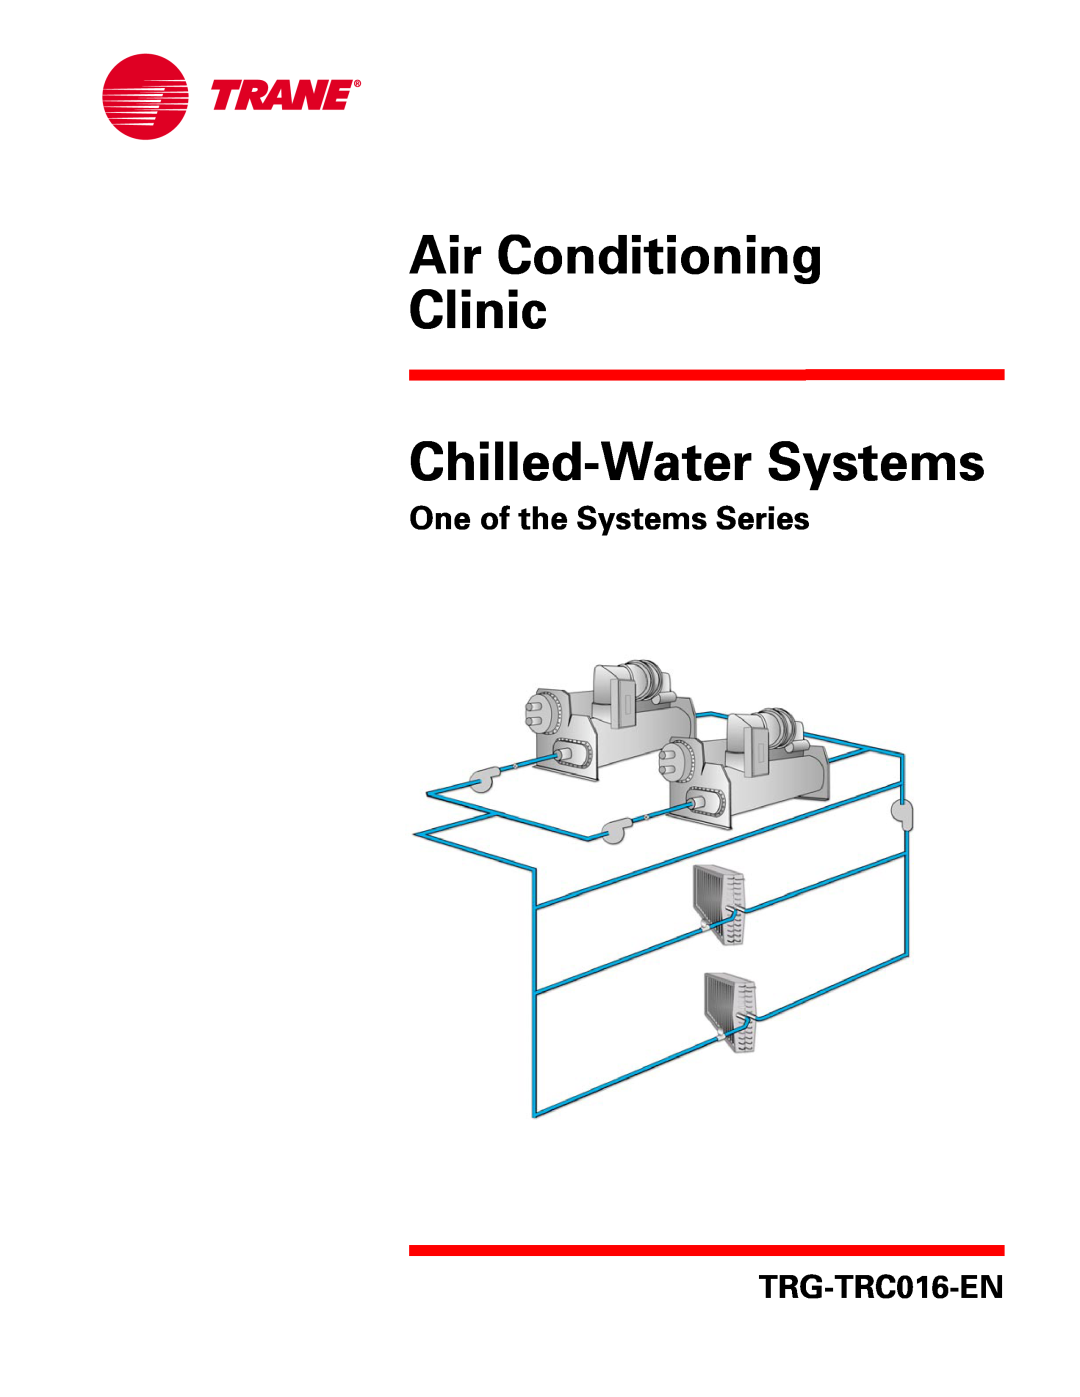 Trane TRG-TRC016-EN manual Air Conditioning Clinic Chilled-WaterSystems, One of the Systems Series 